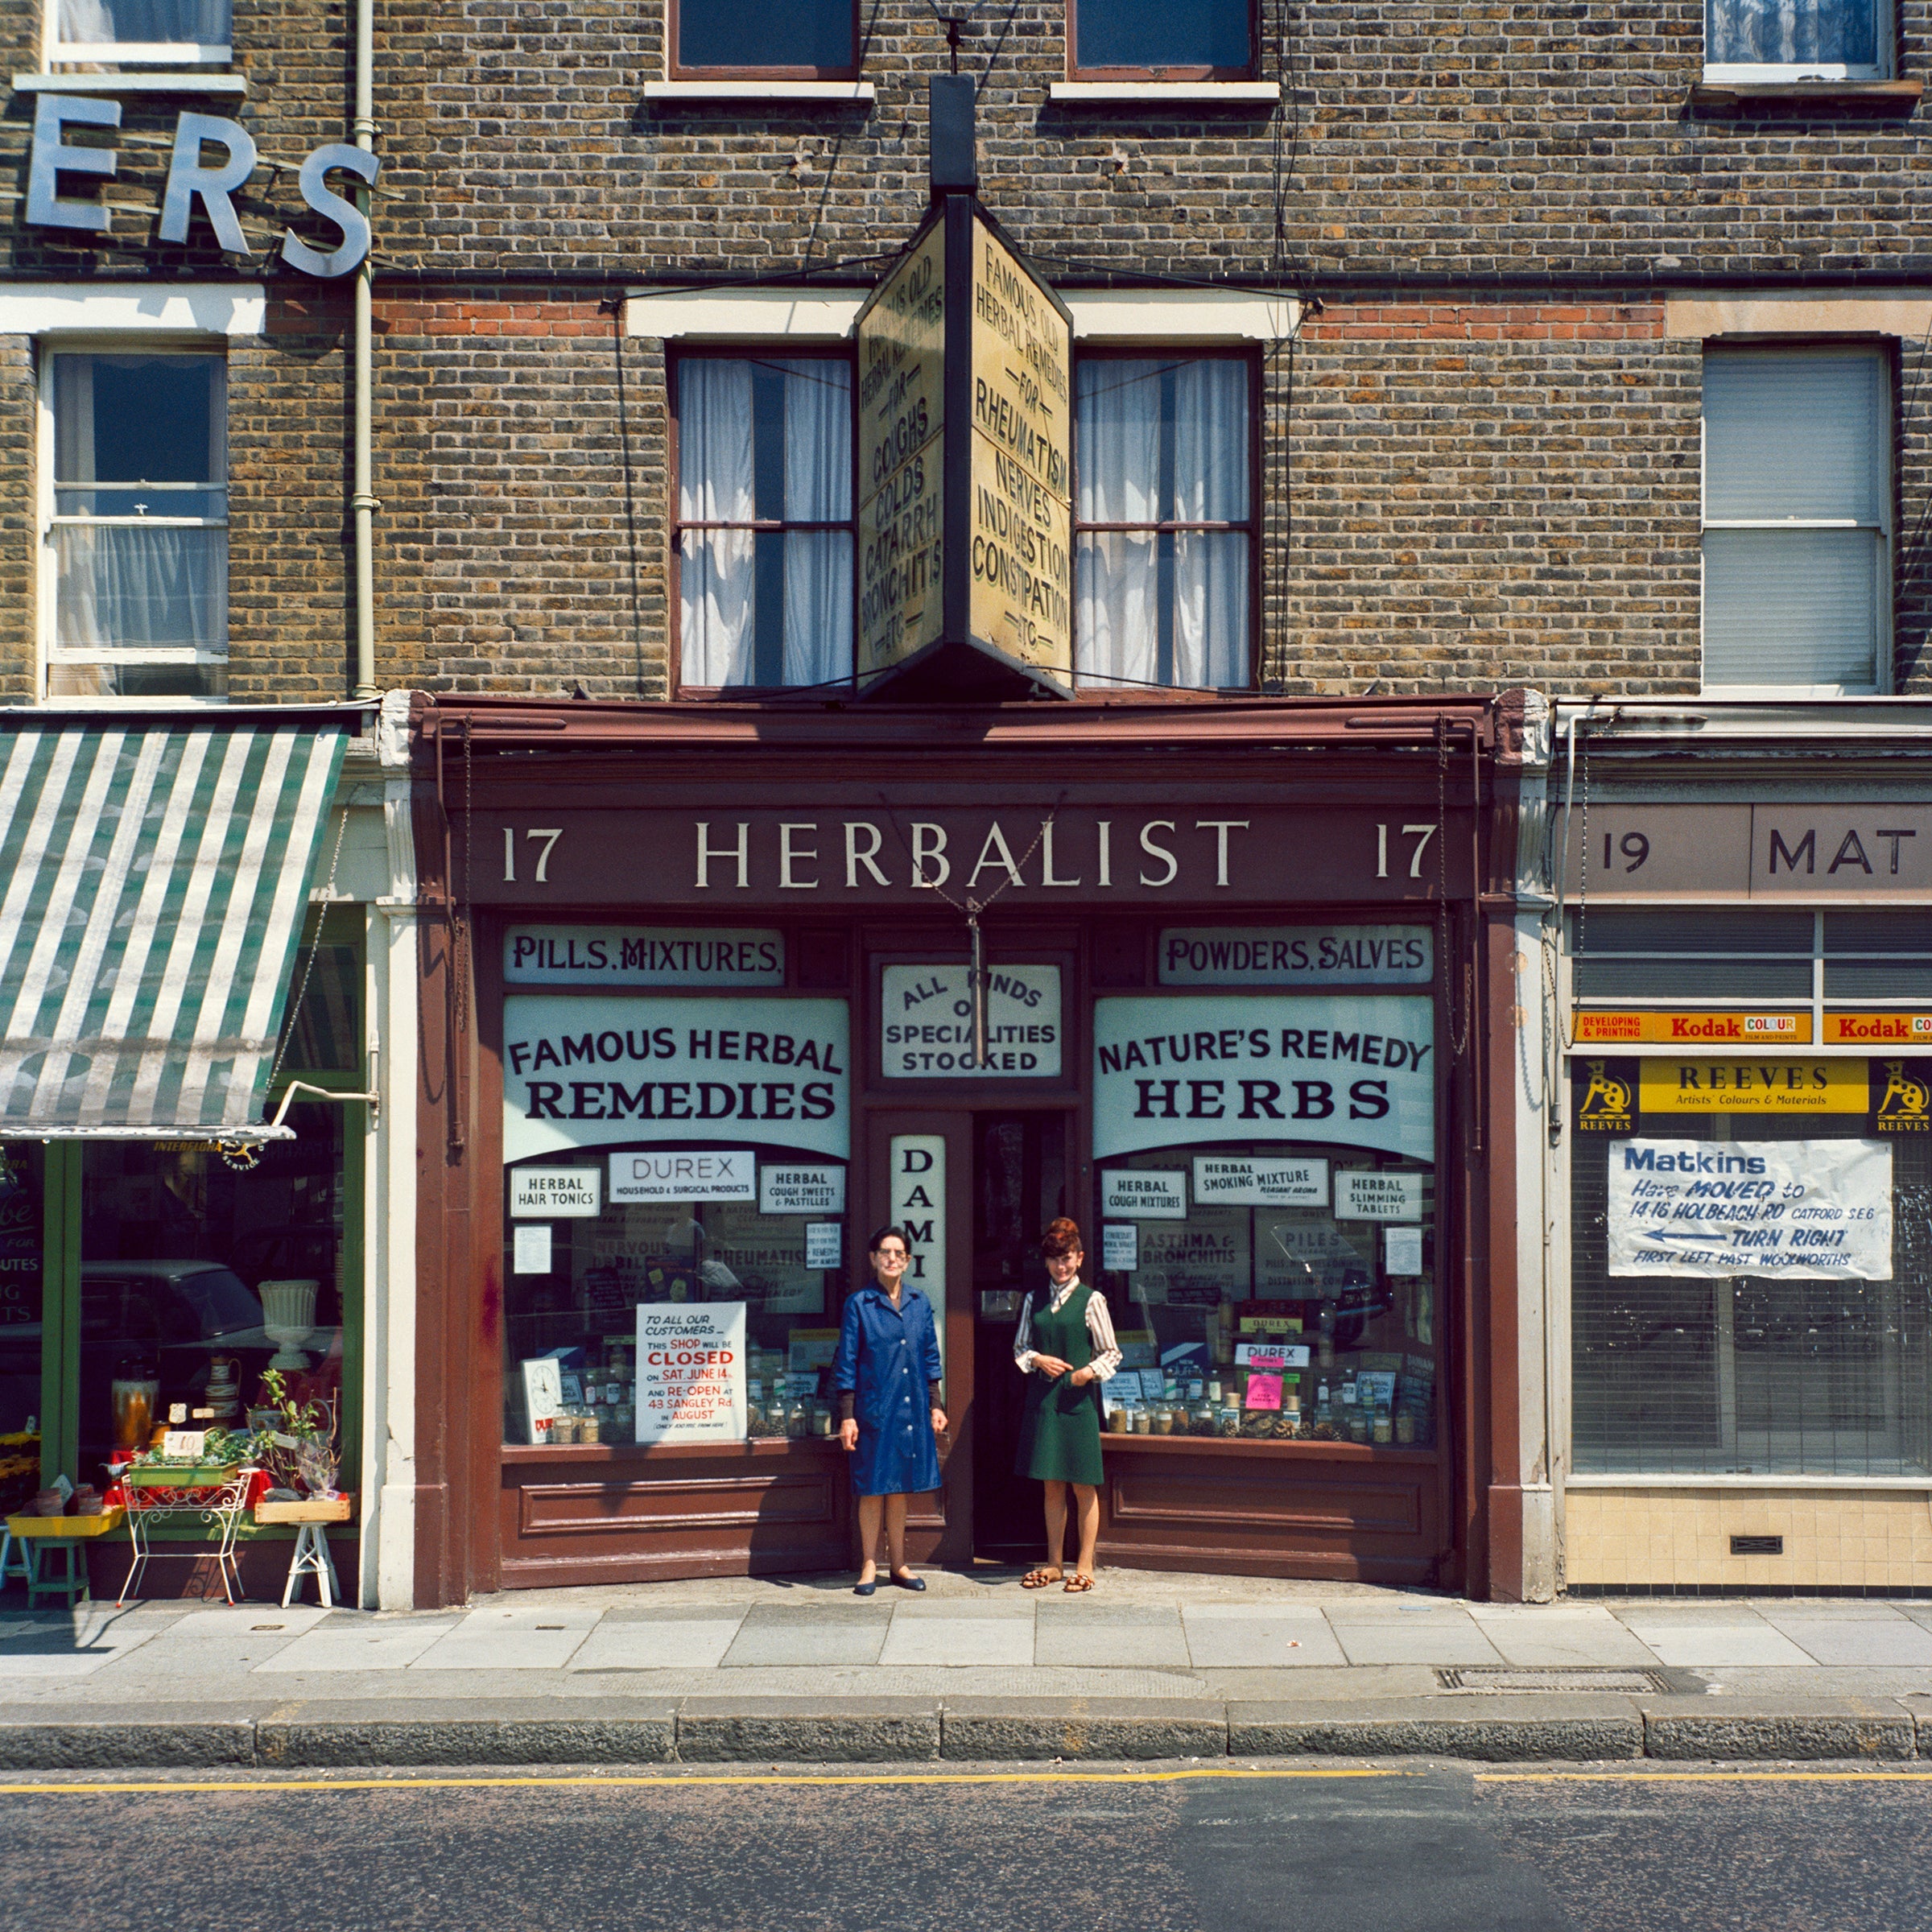 Mrs. McArthy & her daughter, Sangley Road, London, 1975 - 16x20" Pigment Print